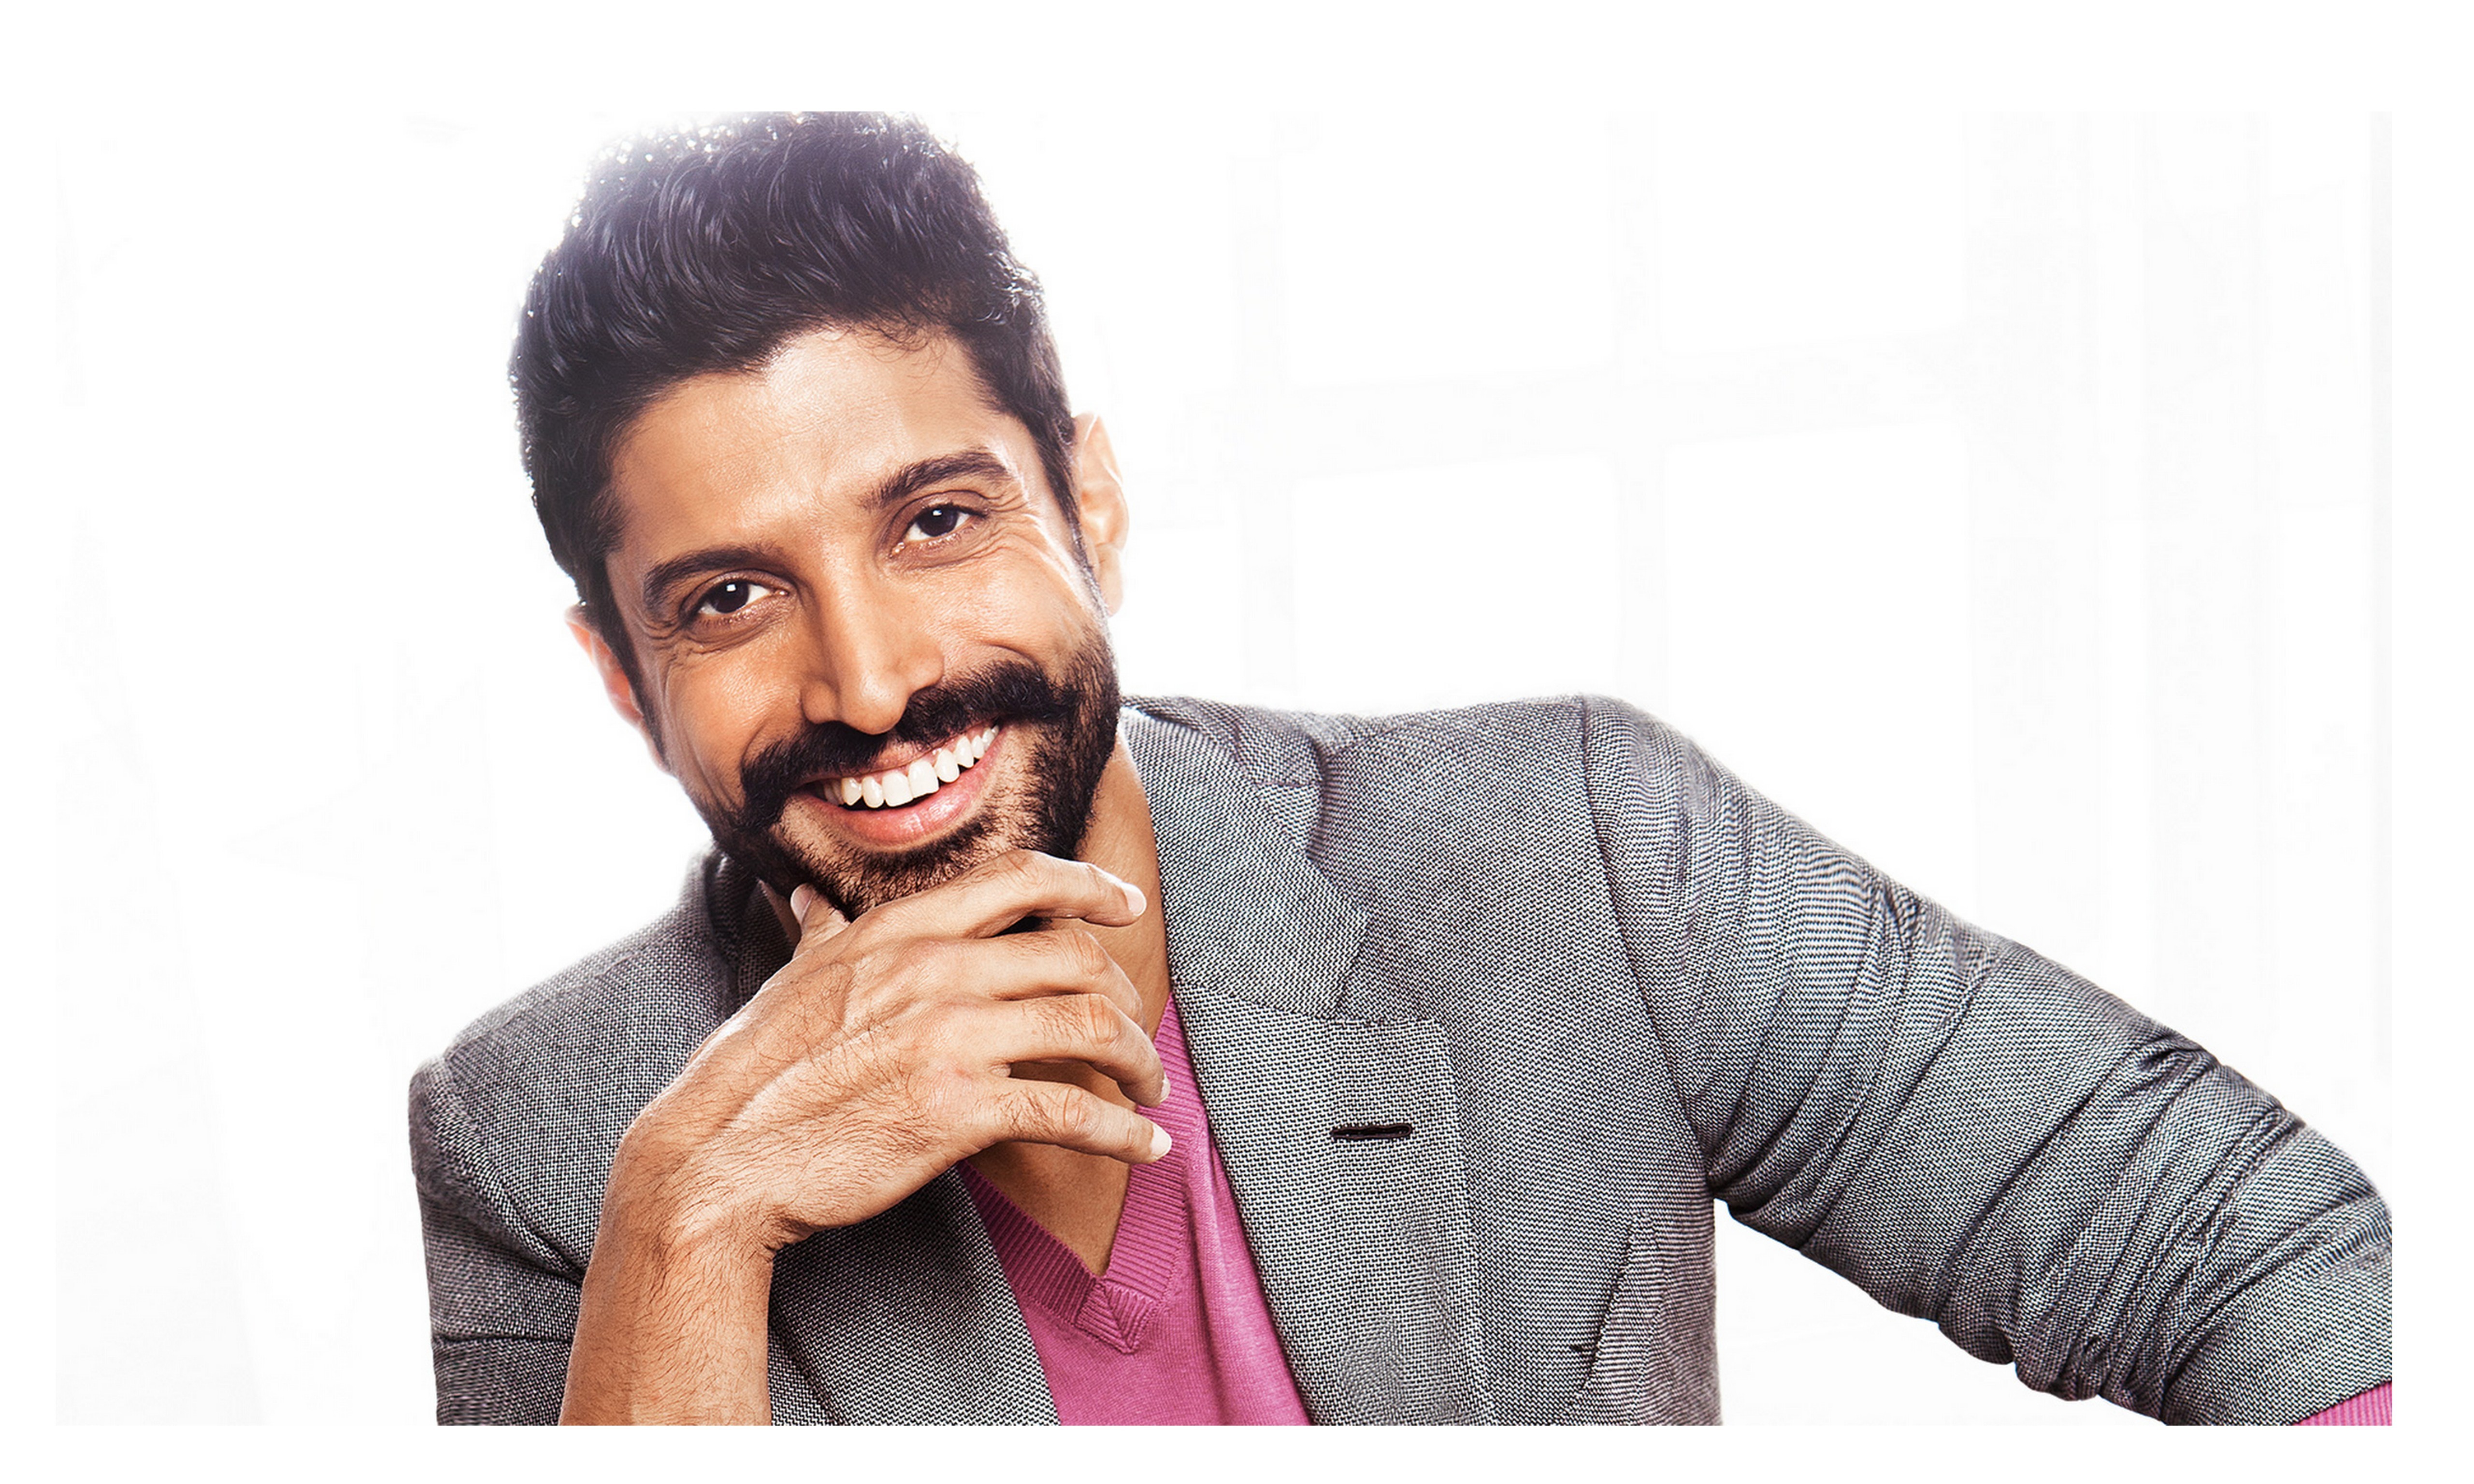 Farhan Akhtar: I Did Not Go To Khairabad For The Film's Publicity